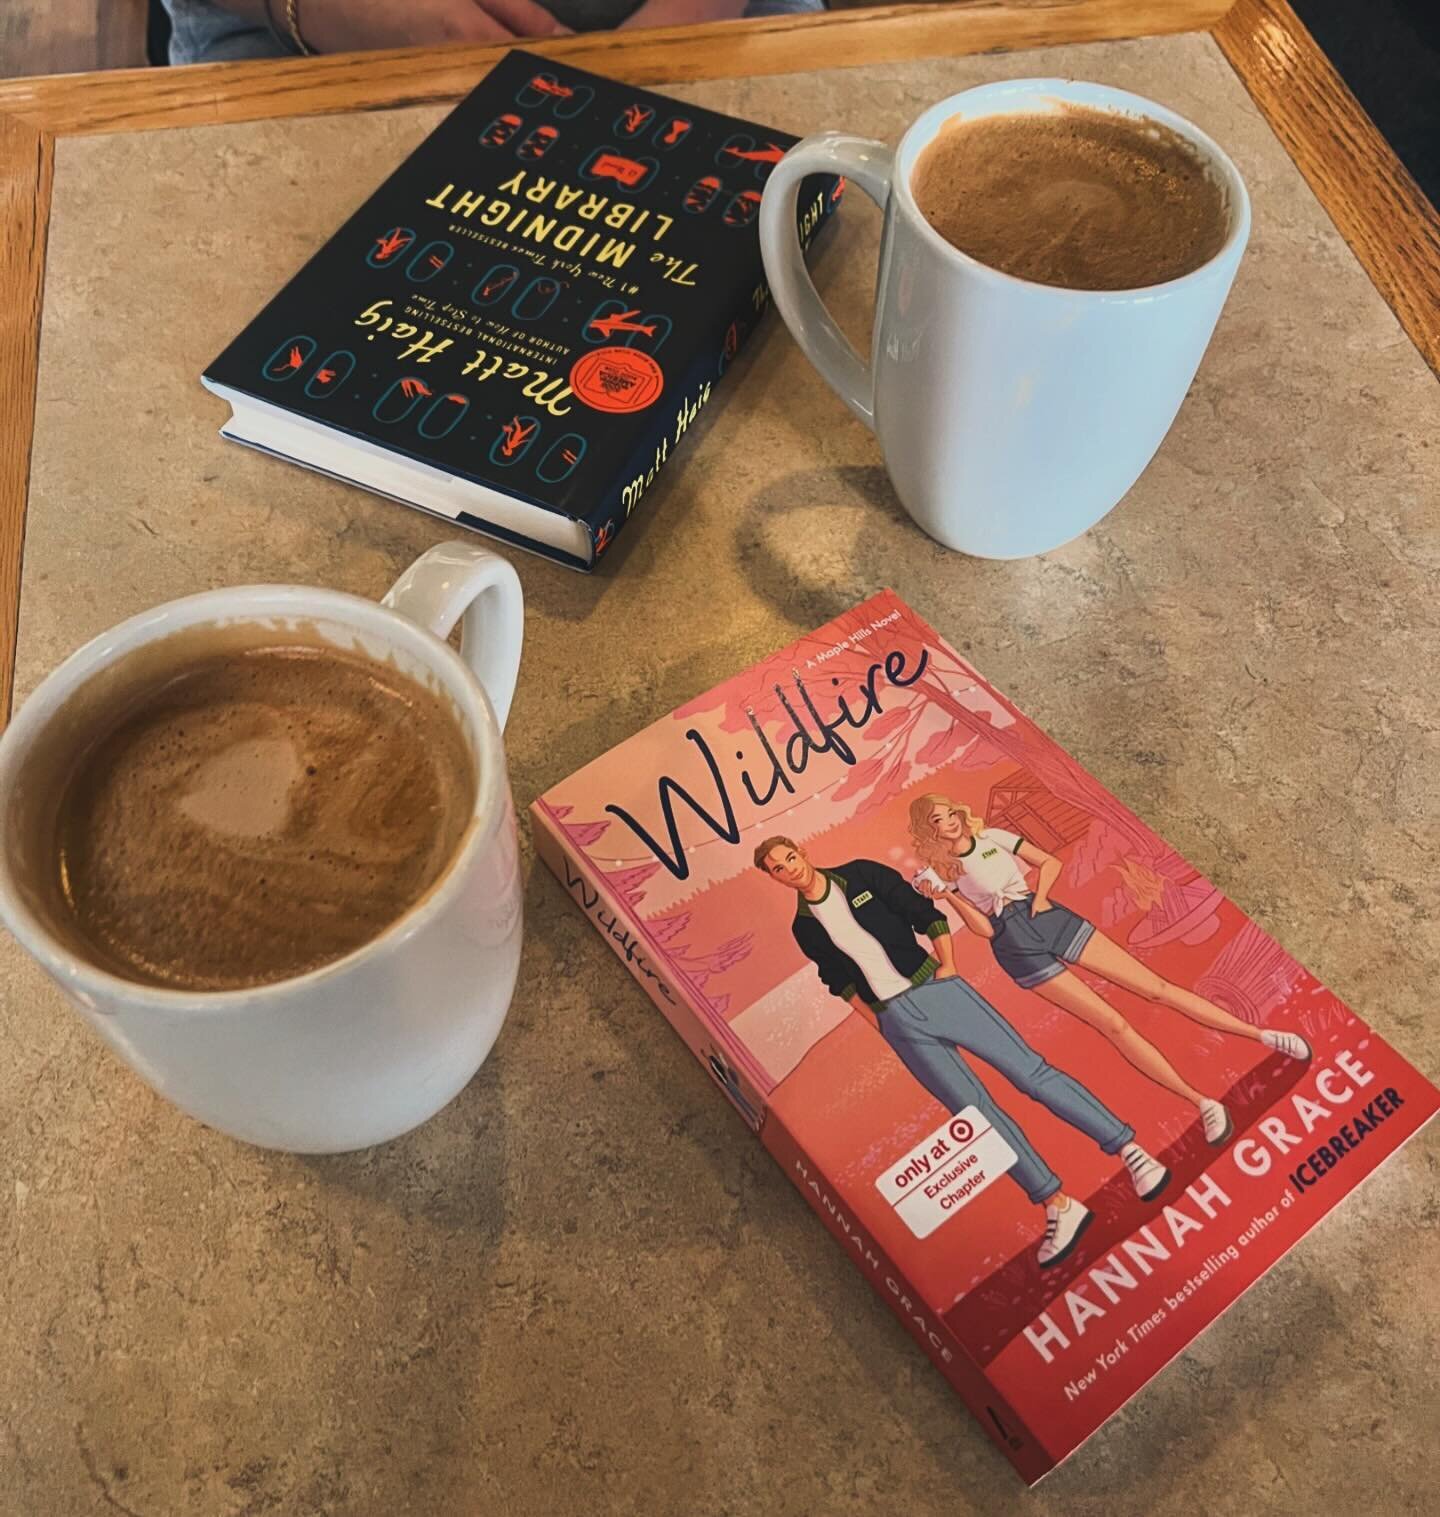 &ldquo;There are no faster or firmer friendships than those formed between people who love the same books&rdquo;&mdash;Irving Stone 📚☕️ #wildfire #themidnightlibrary #amreading #readerlife #reading #bookish